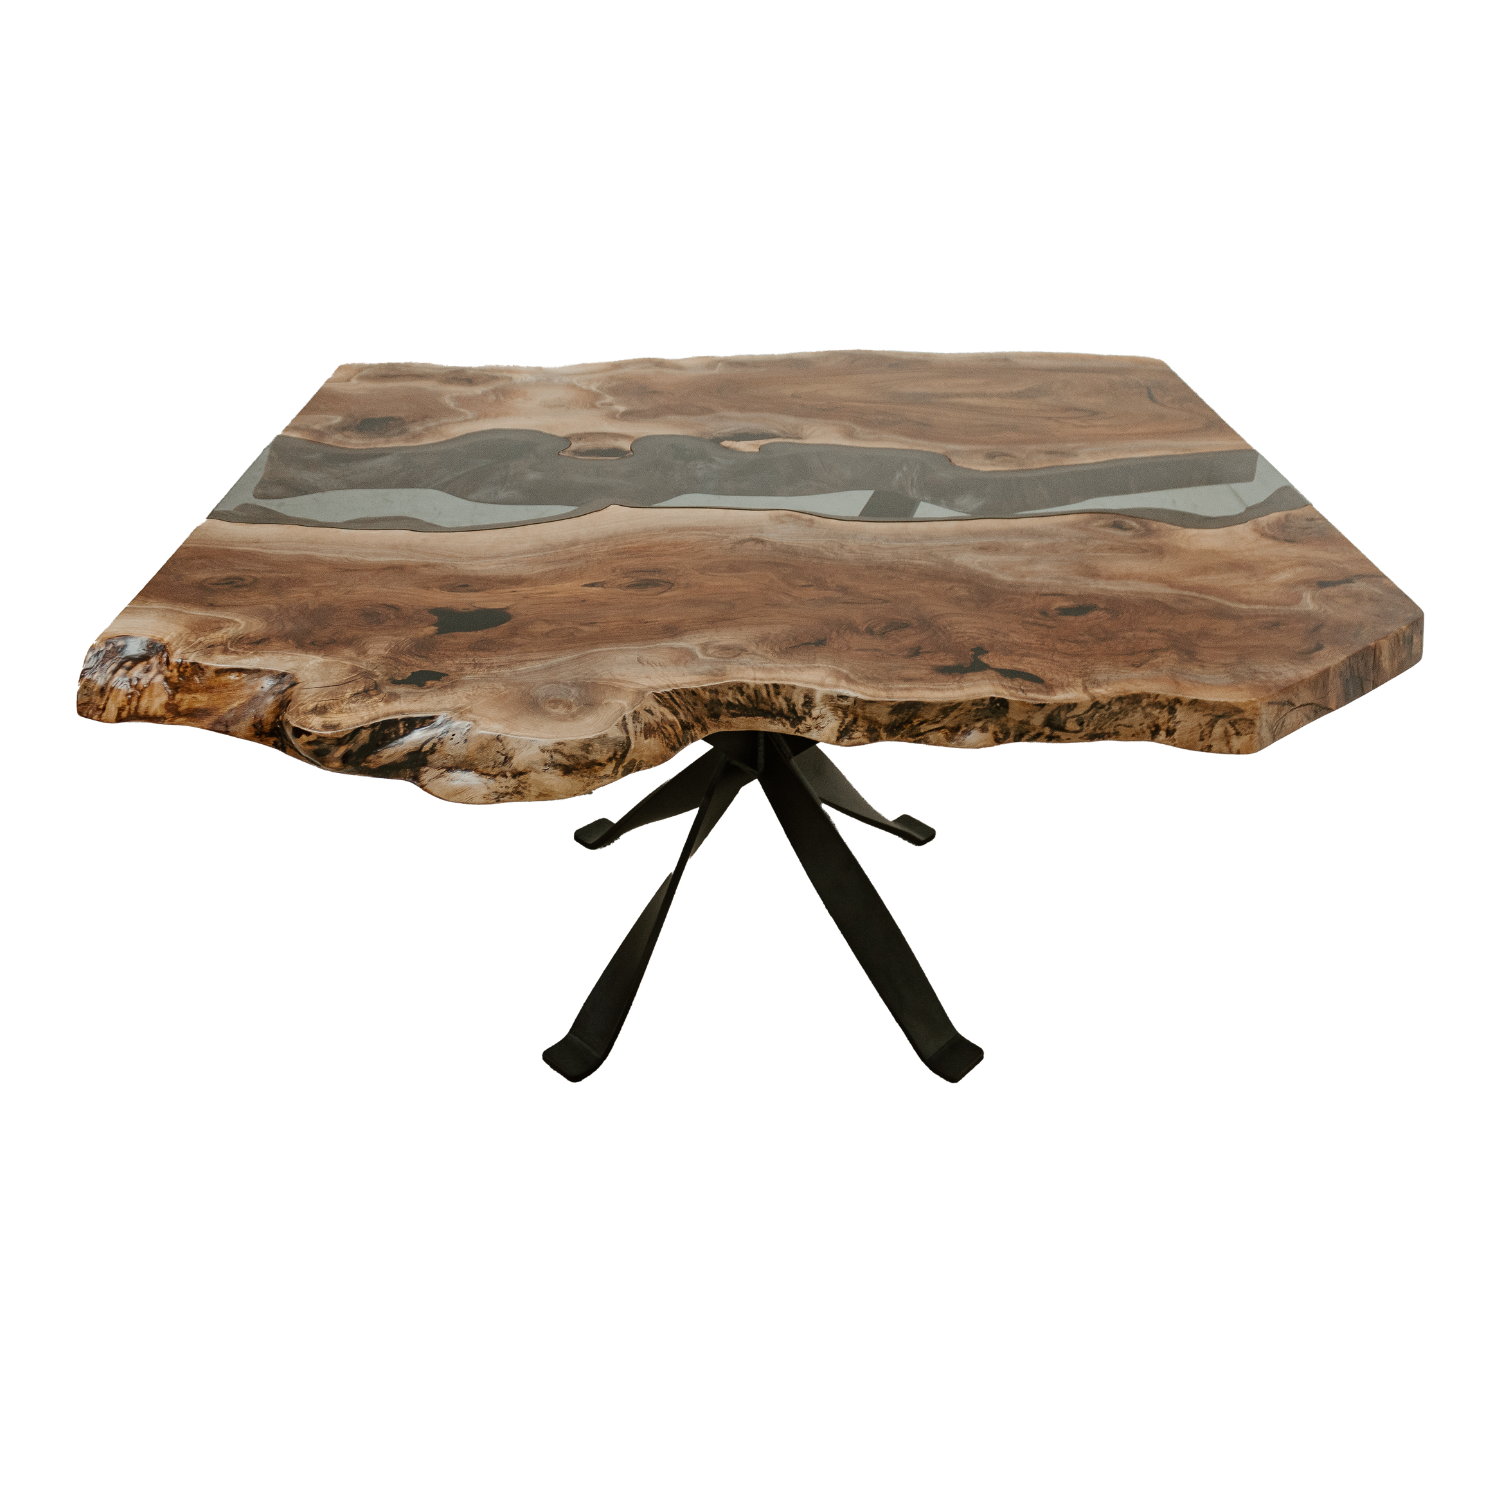 Glass River Walnut Dining Table